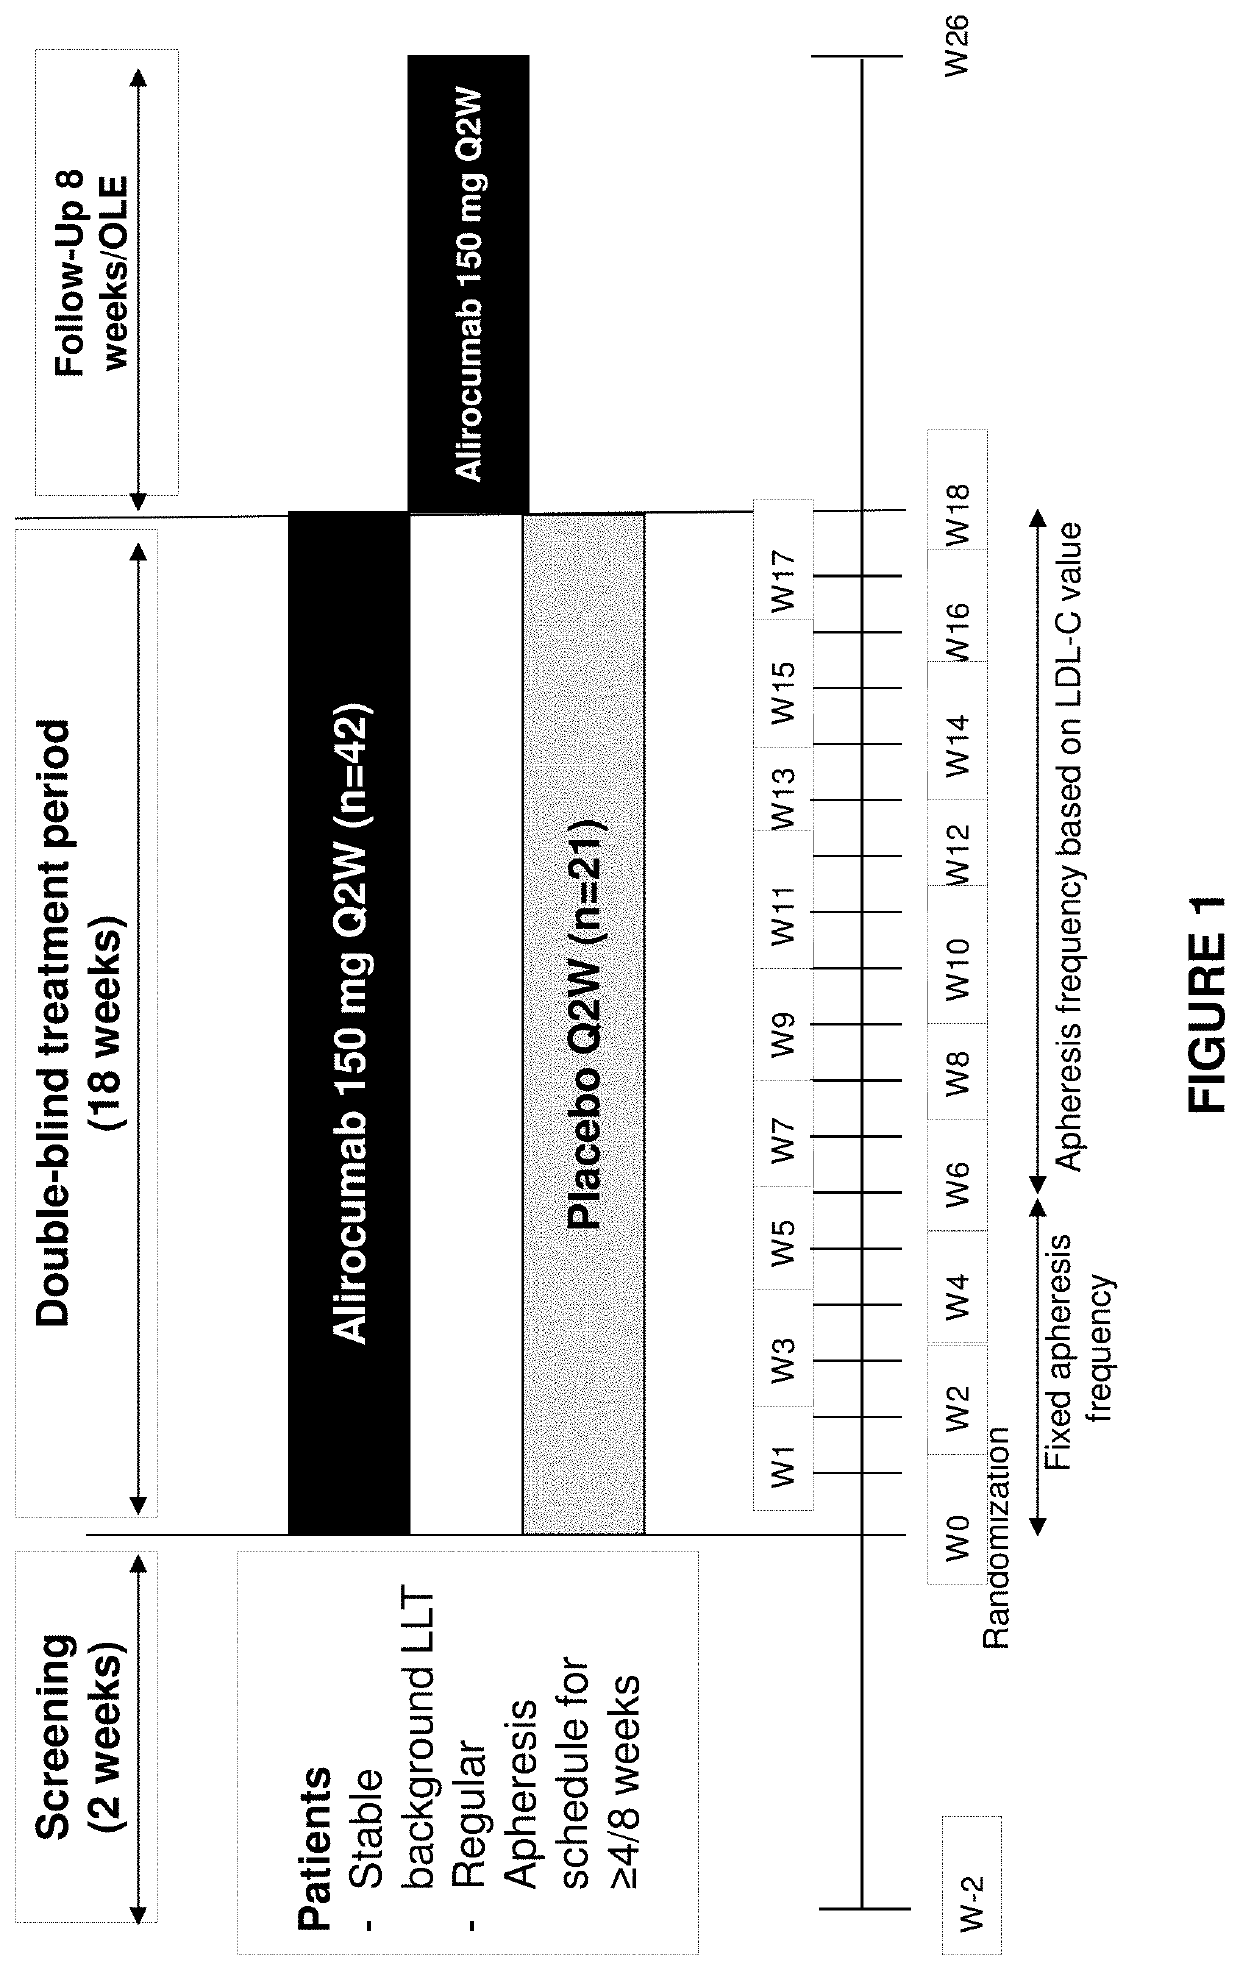 Methods for reducing or eliminating the need for lipoprotein apheresis in patients with hyperlipidemia by administering alirocumab